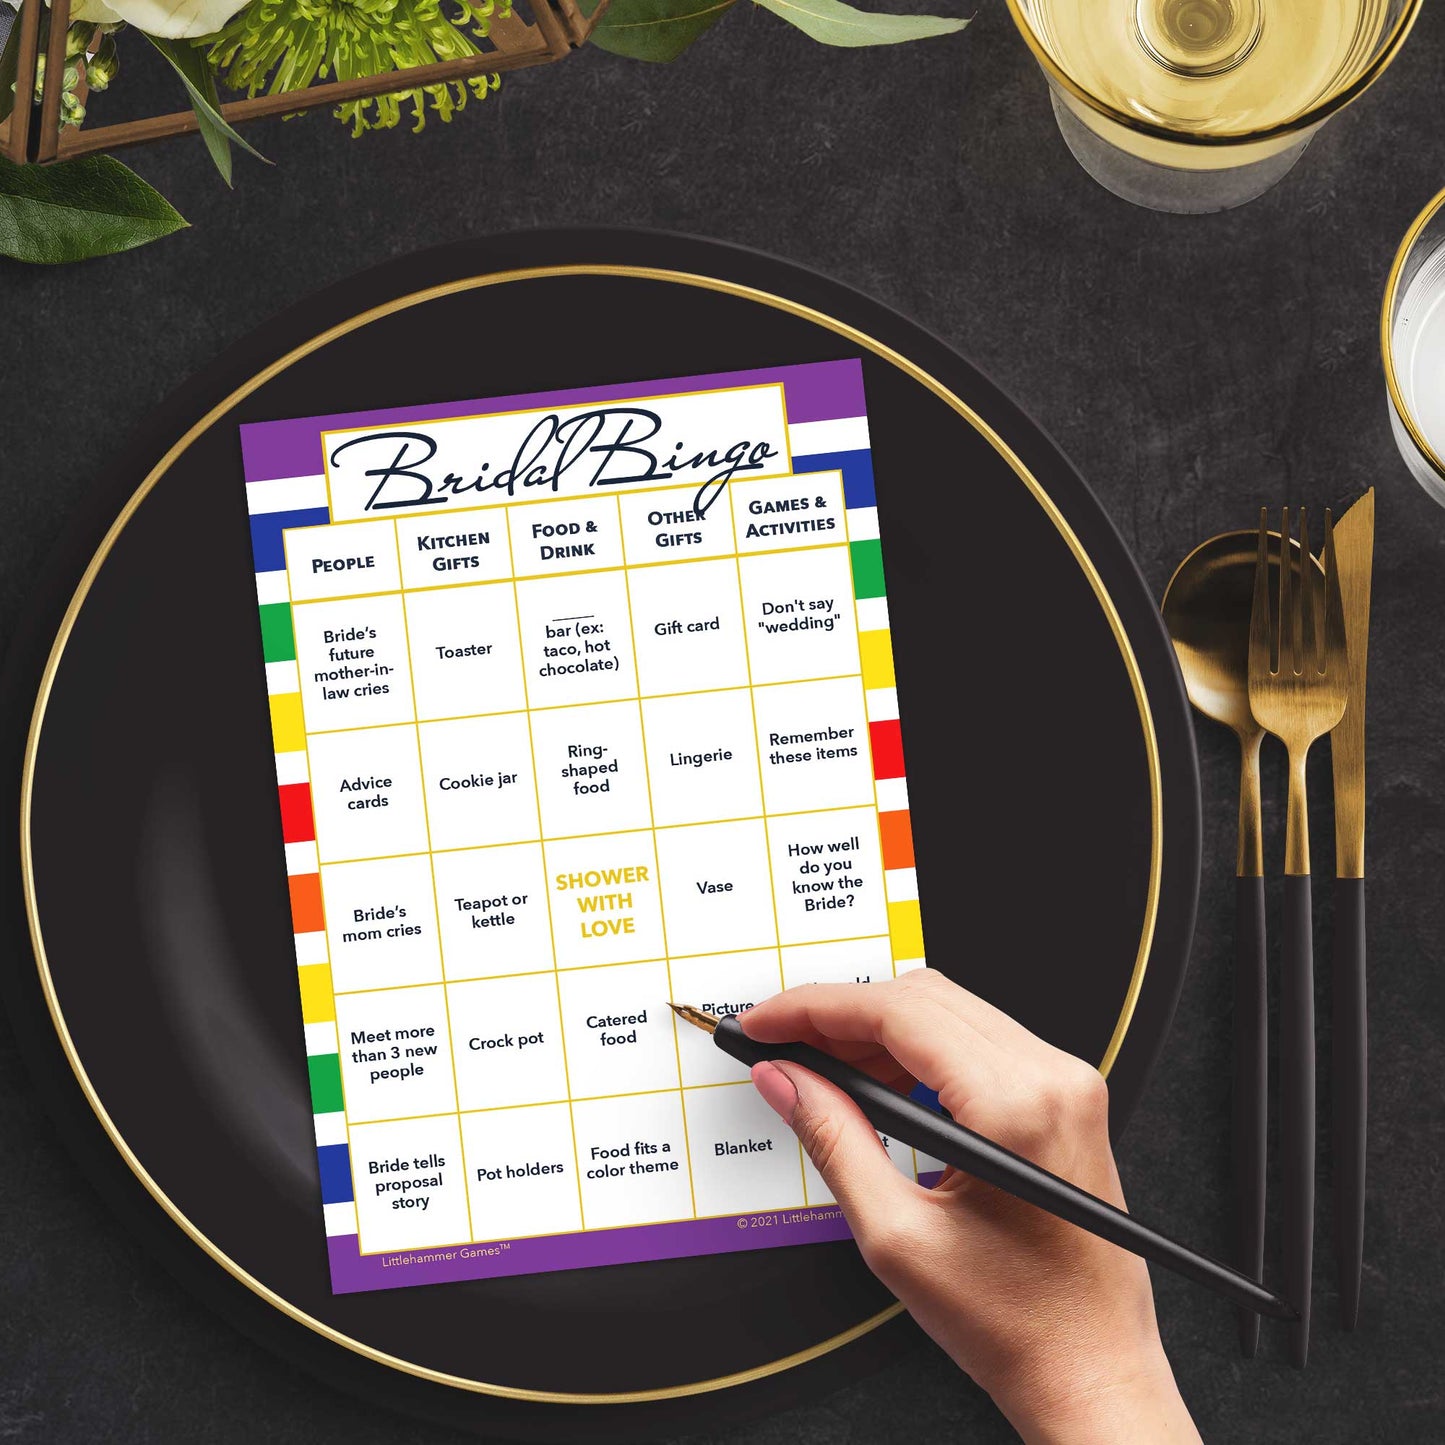 Woman with a pen sitting at a table with a rainbow-striped Bridal Bingo game card on a black and gold plate at a dark place setting